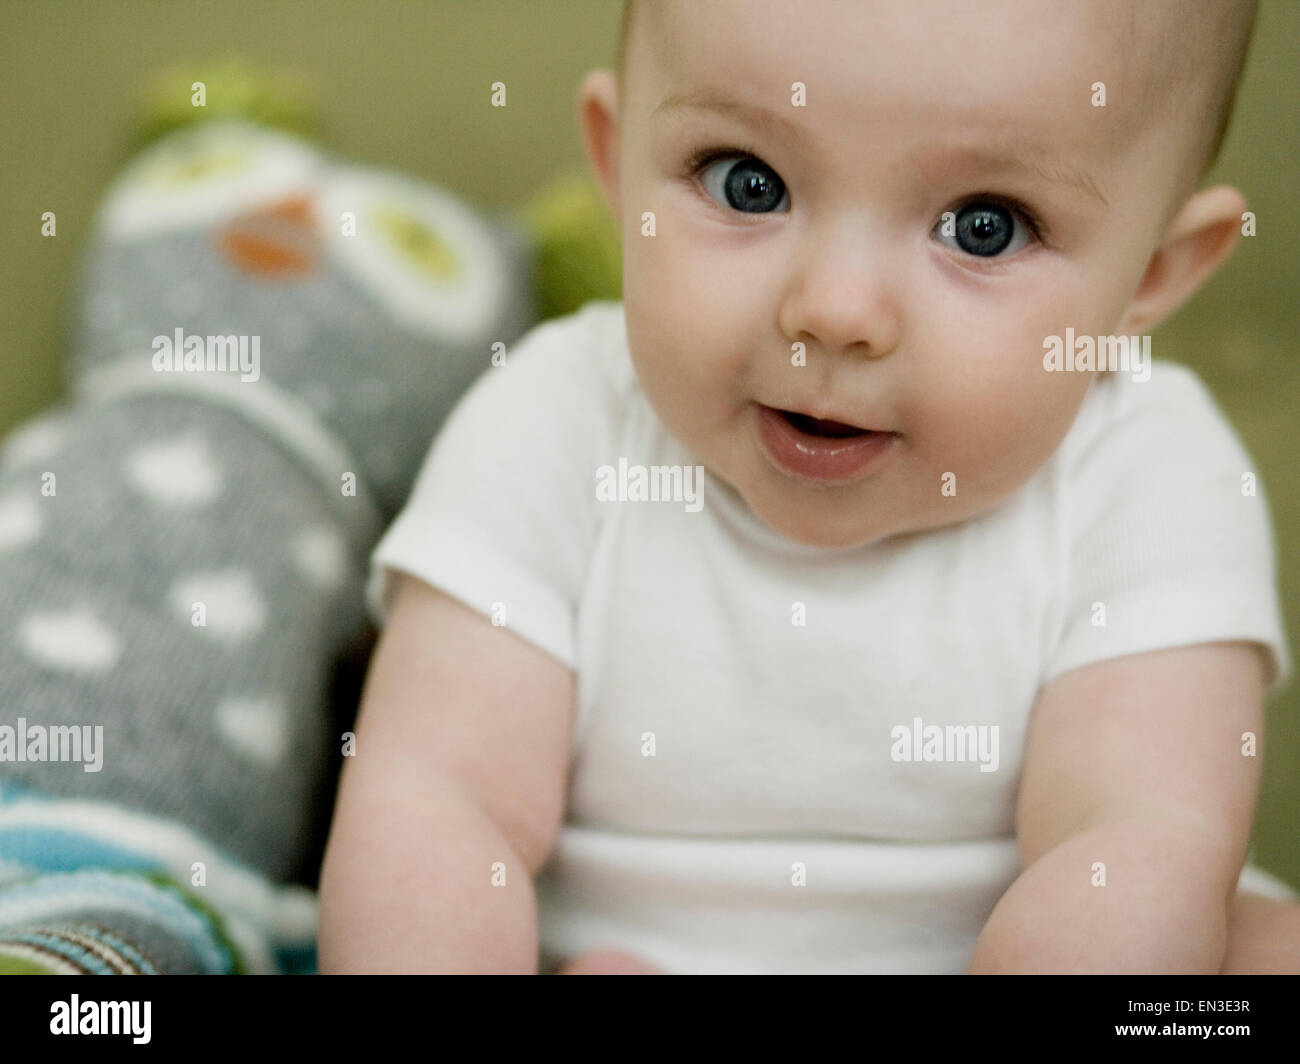 baby with a stuffed animal Stock Photo